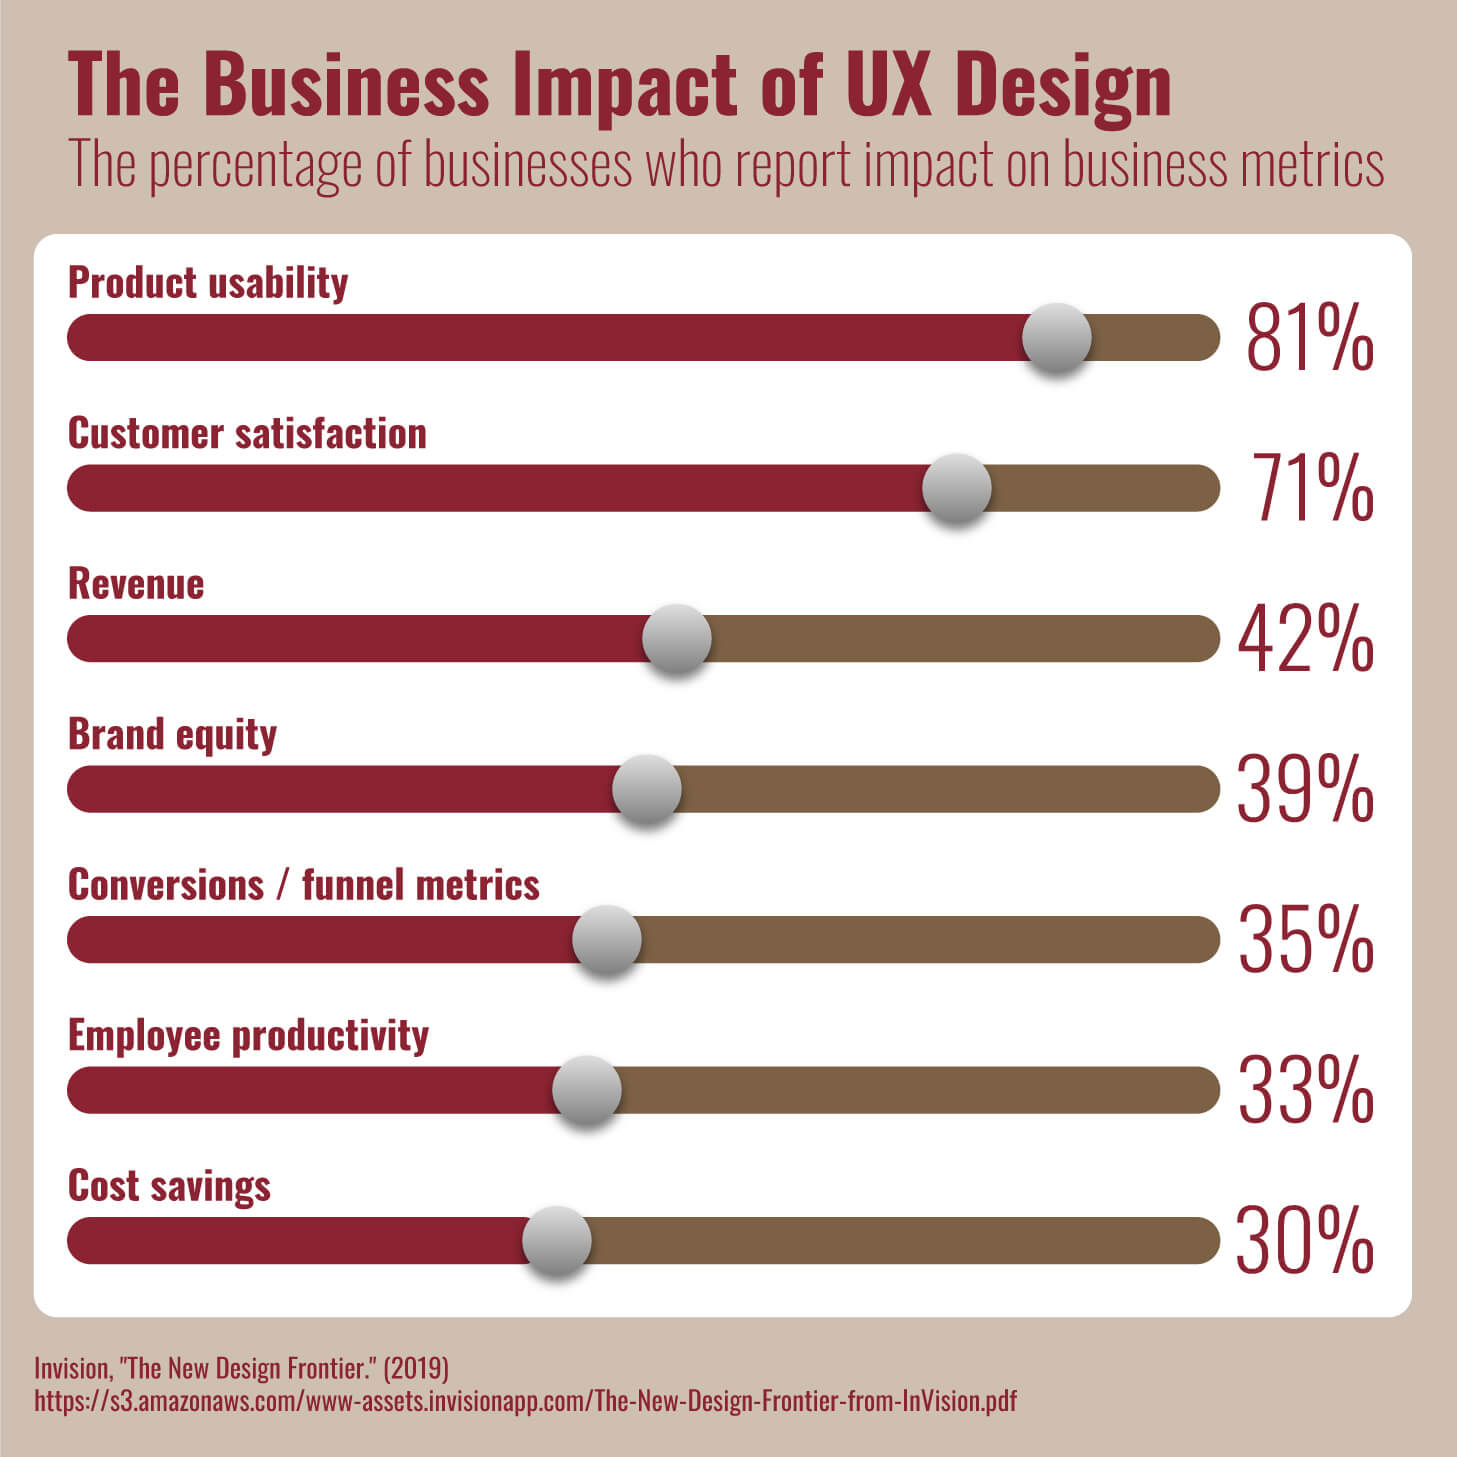 A chart showing the business impact of UX design